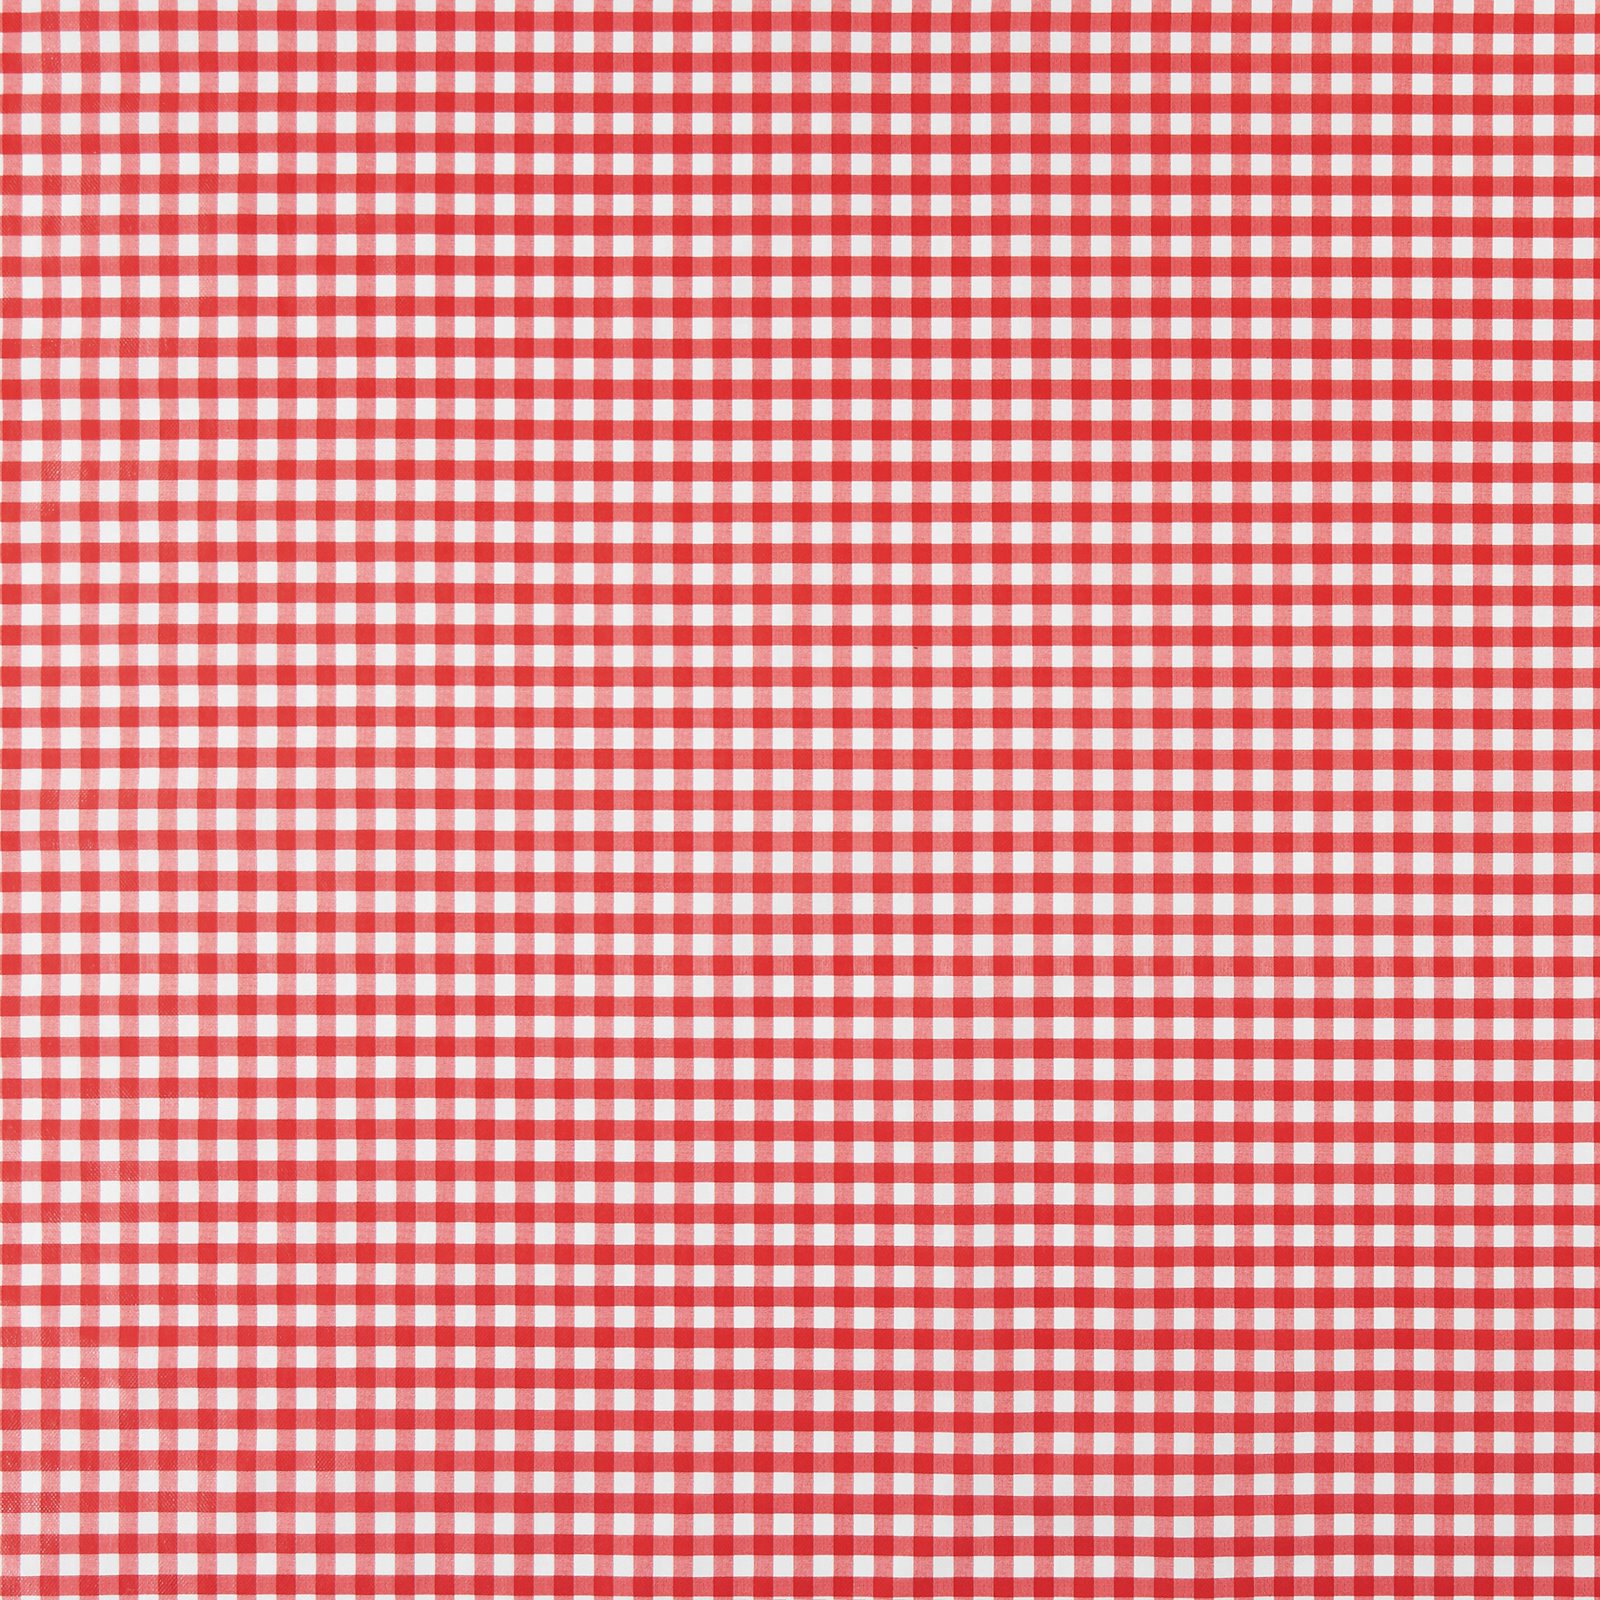 Non-woven oilcloth w red/white check 861420_pack_sp